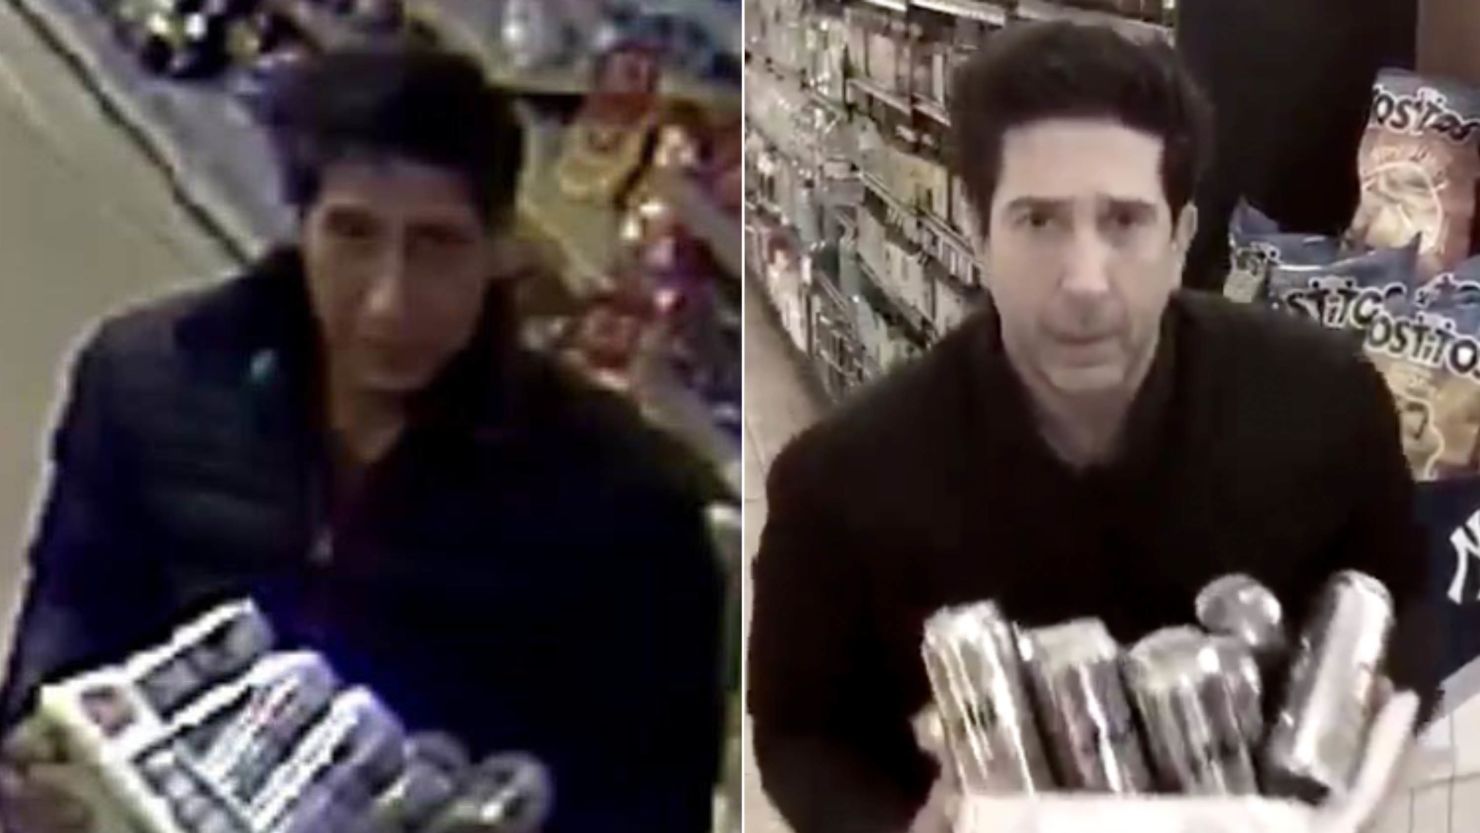 The suspect (left) and his doppelganger, "Friends" star David Schwimmer (right) in his spoof of the viral video.